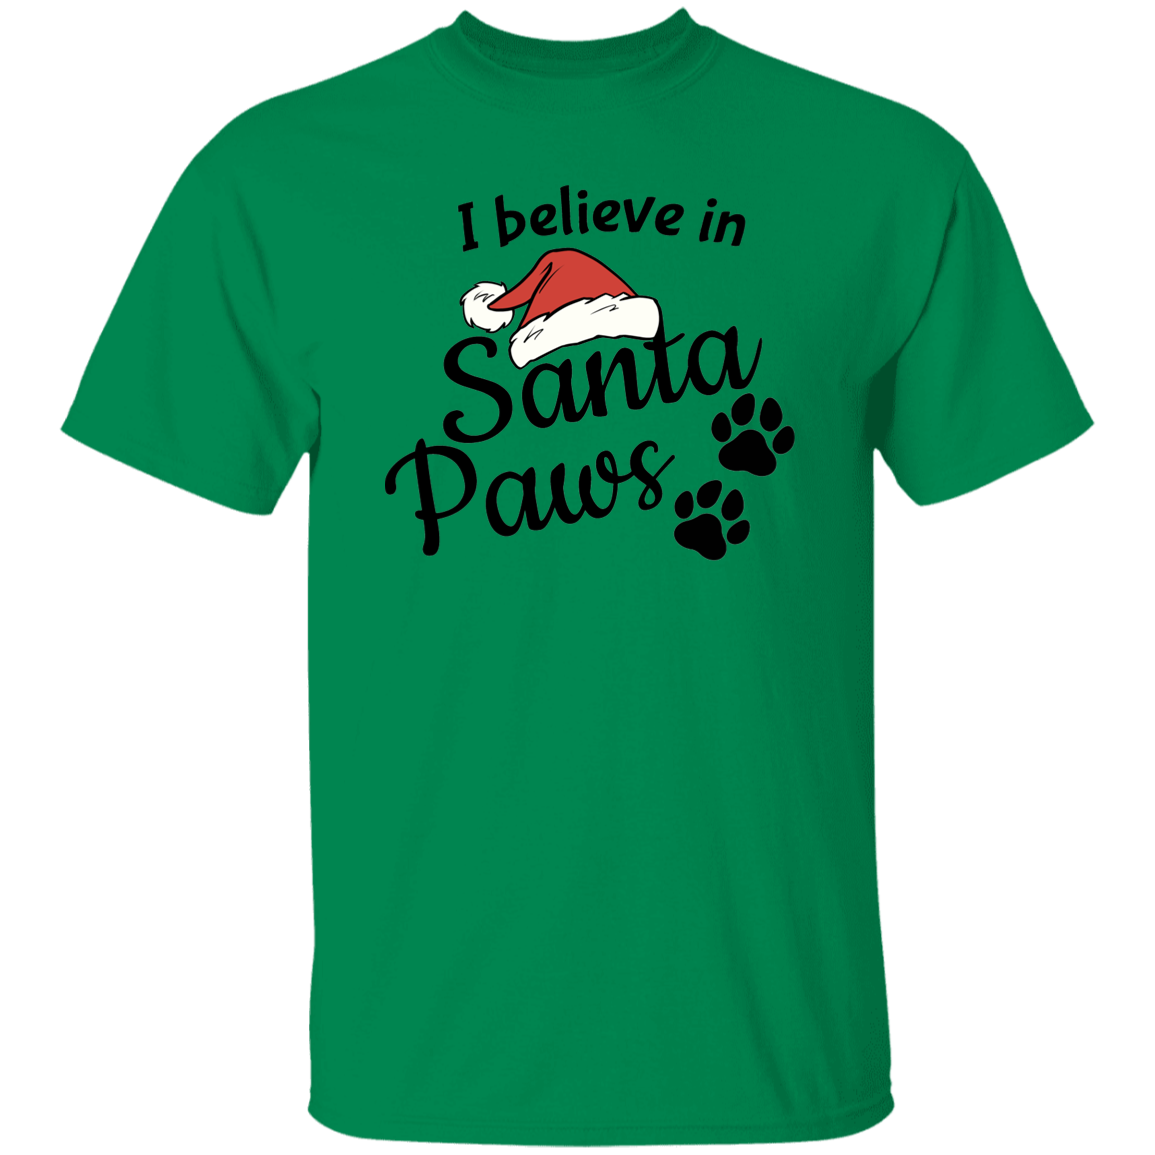 I Believe in Santa Paws - T-Shirt